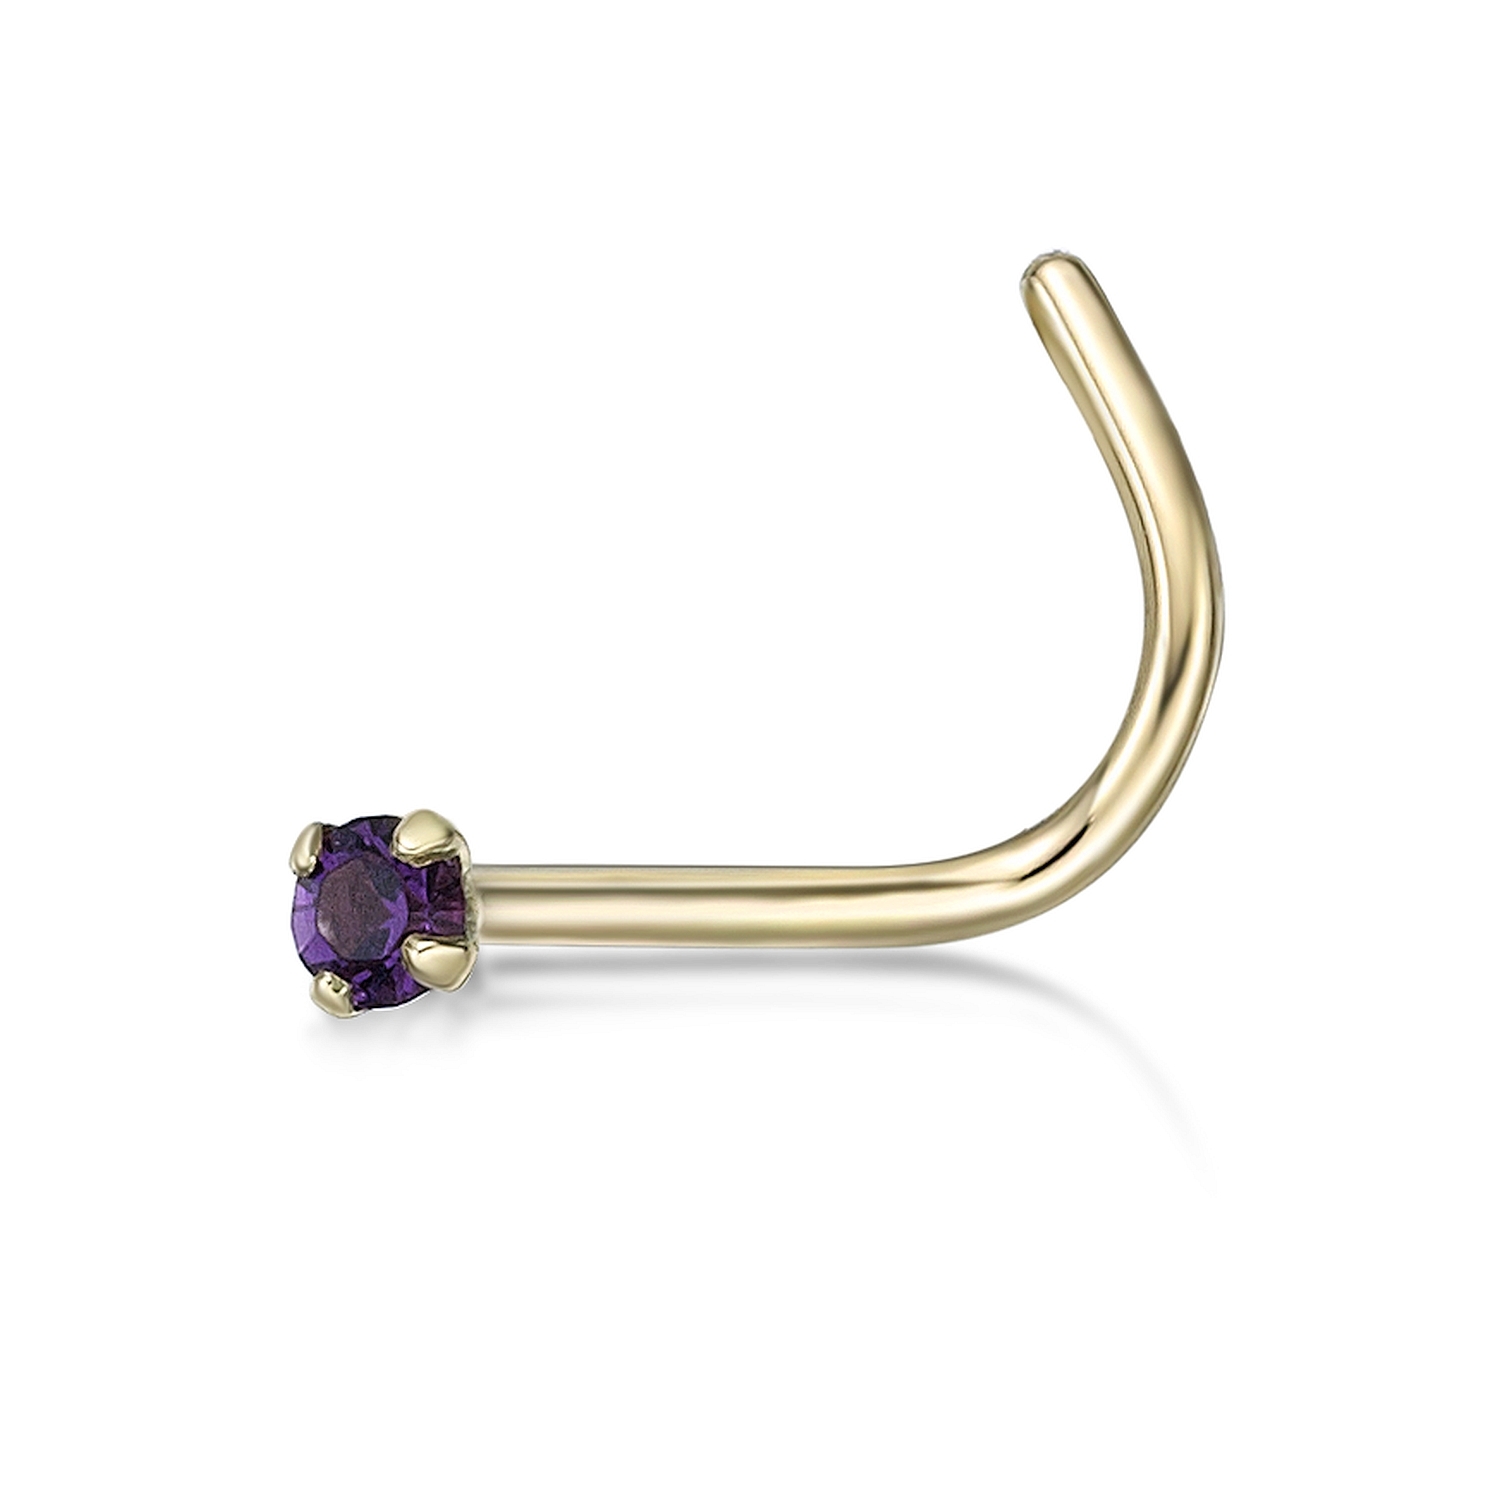 Women's Violet Cubic Zirconia Curved Stud Nose Ring, 14K Yellow Gold, 20 Gauge, 2 MM | Lavari Jewelers